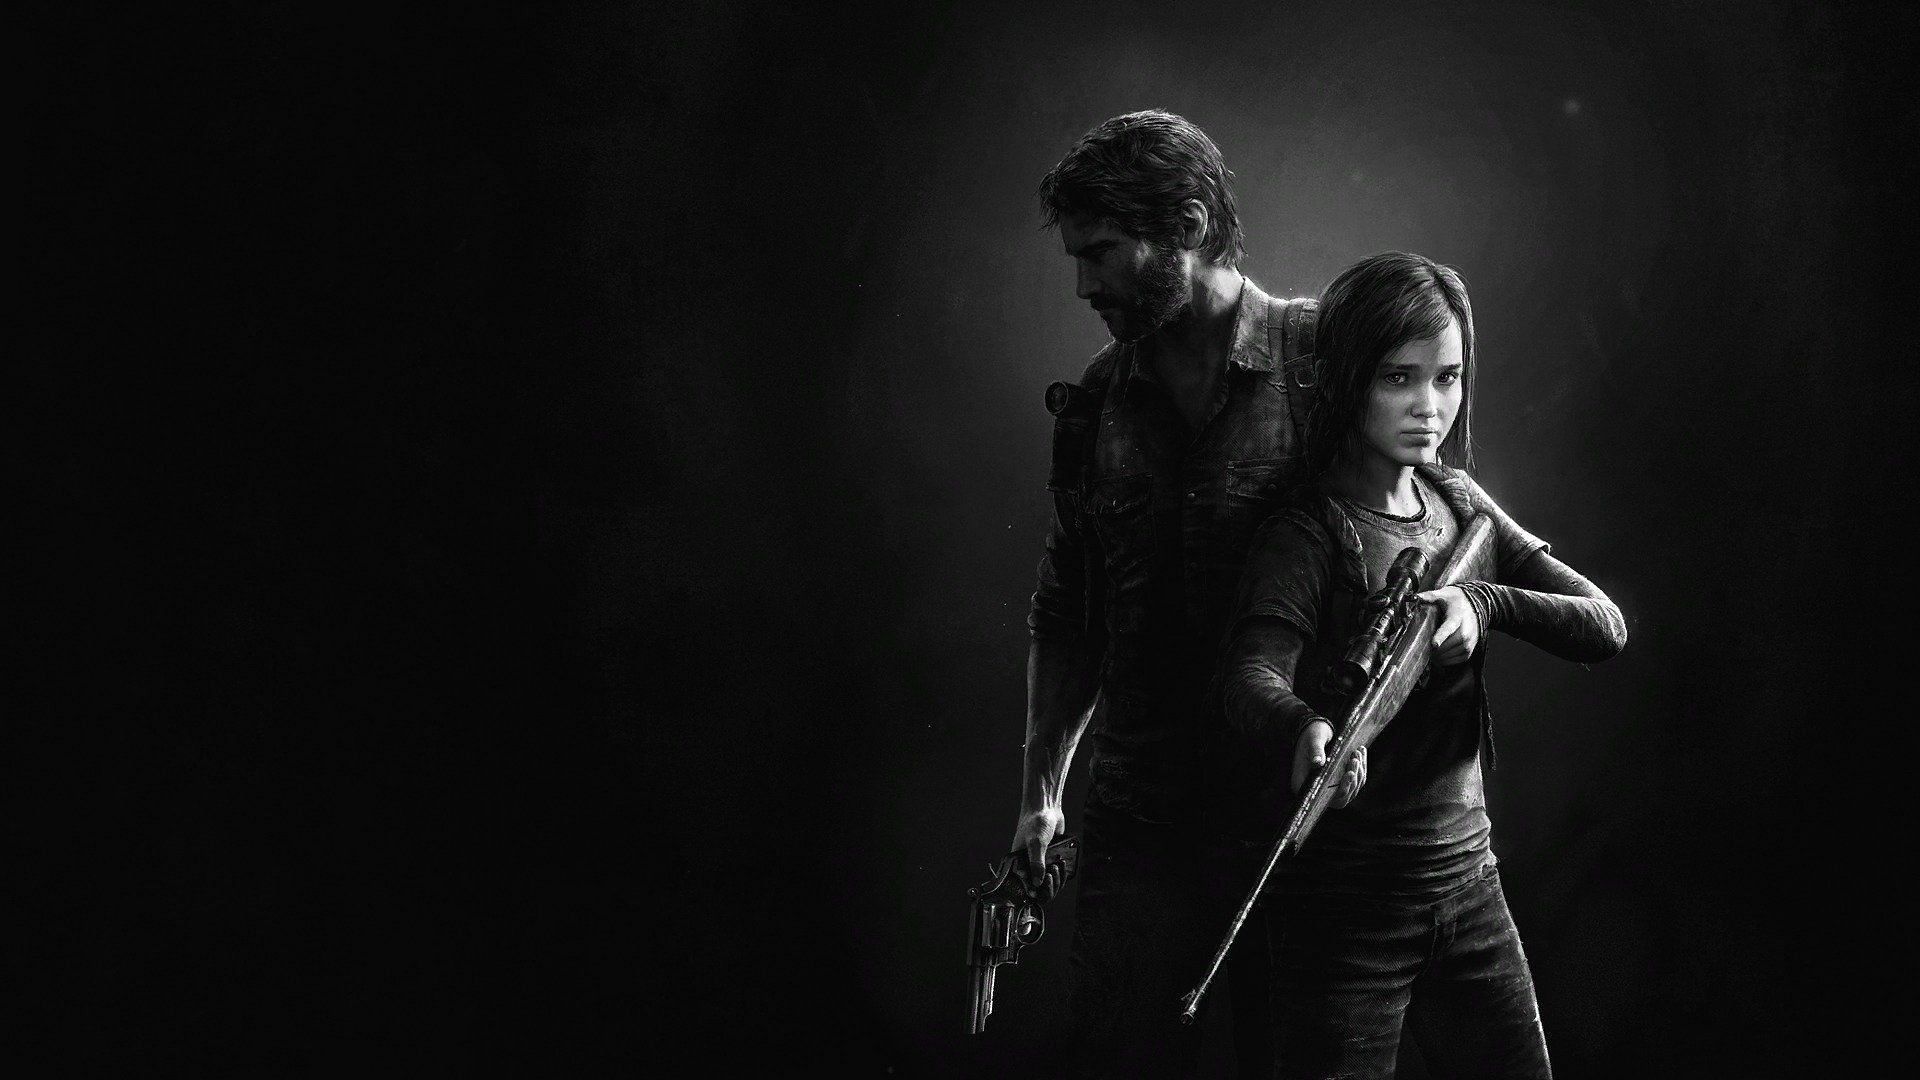 Joel and Ellie go on a survival adventure to defeat the clickers. (Image via Naughty Dog)